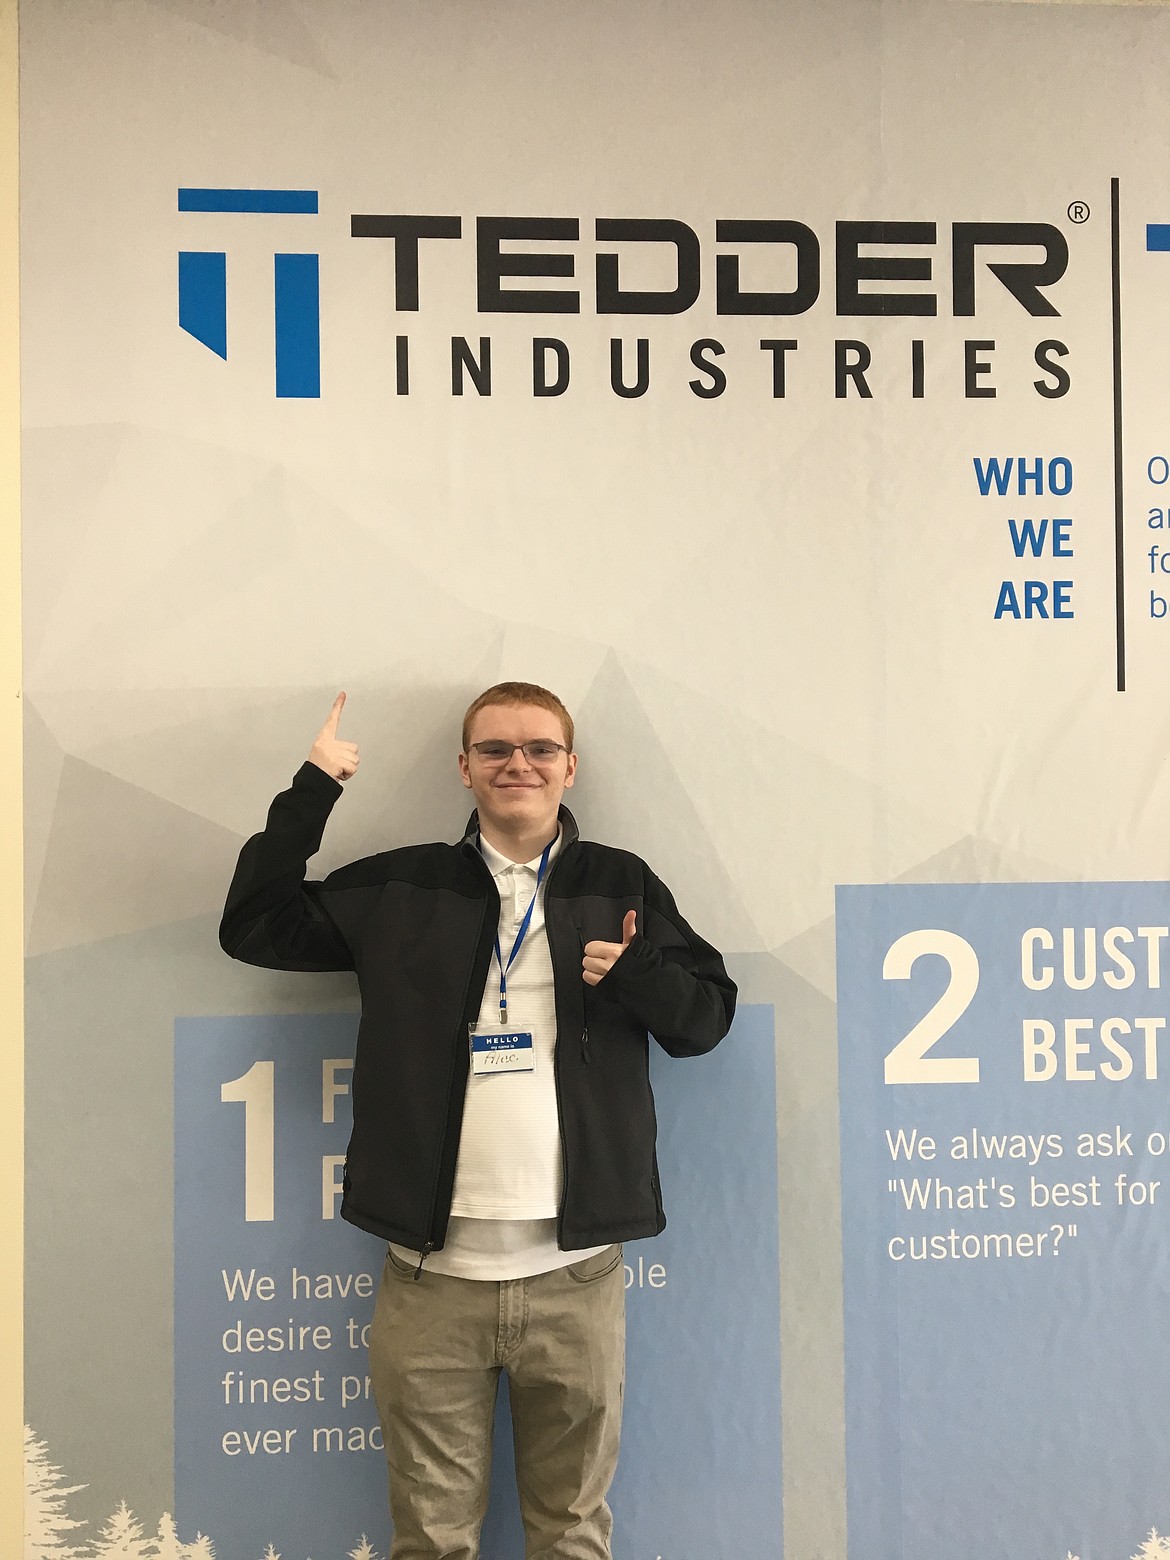 Alec Hurlocker, 20, was hired as a production line team member at Tedder Industries in Post Falls before he even graduated from Project SEARCH, which held its commencement ceremony Wednesday. The Lake City High School grad is pictured here during his May 23 orientation with the company. (Courtesy photo)